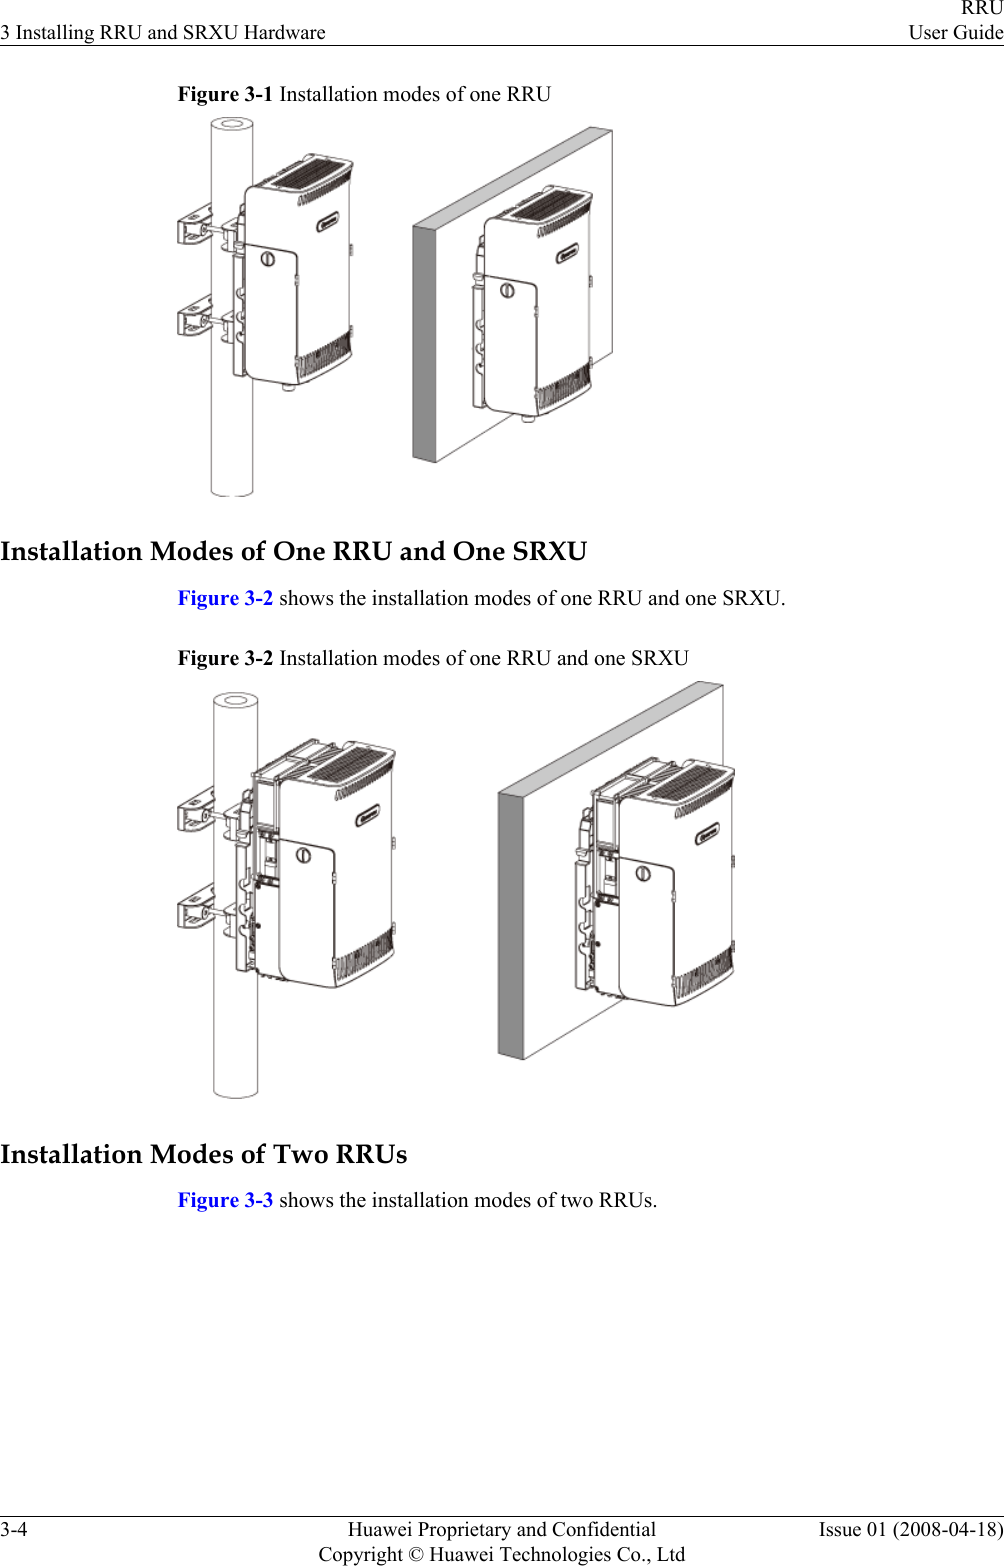 Figure 3-1 Installation modes of one RRUInstallation Modes of One RRU and One SRXUFigure 3-2 shows the installation modes of one RRU and one SRXU.Figure 3-2 Installation modes of one RRU and one SRXUInstallation Modes of Two RRUsFigure 3-3 shows the installation modes of two RRUs.3 Installing RRU and SRXU HardwareRRUUser Guide3-4 Huawei Proprietary and ConfidentialCopyright © Huawei Technologies Co., LtdIssue 01 (2008-04-18)